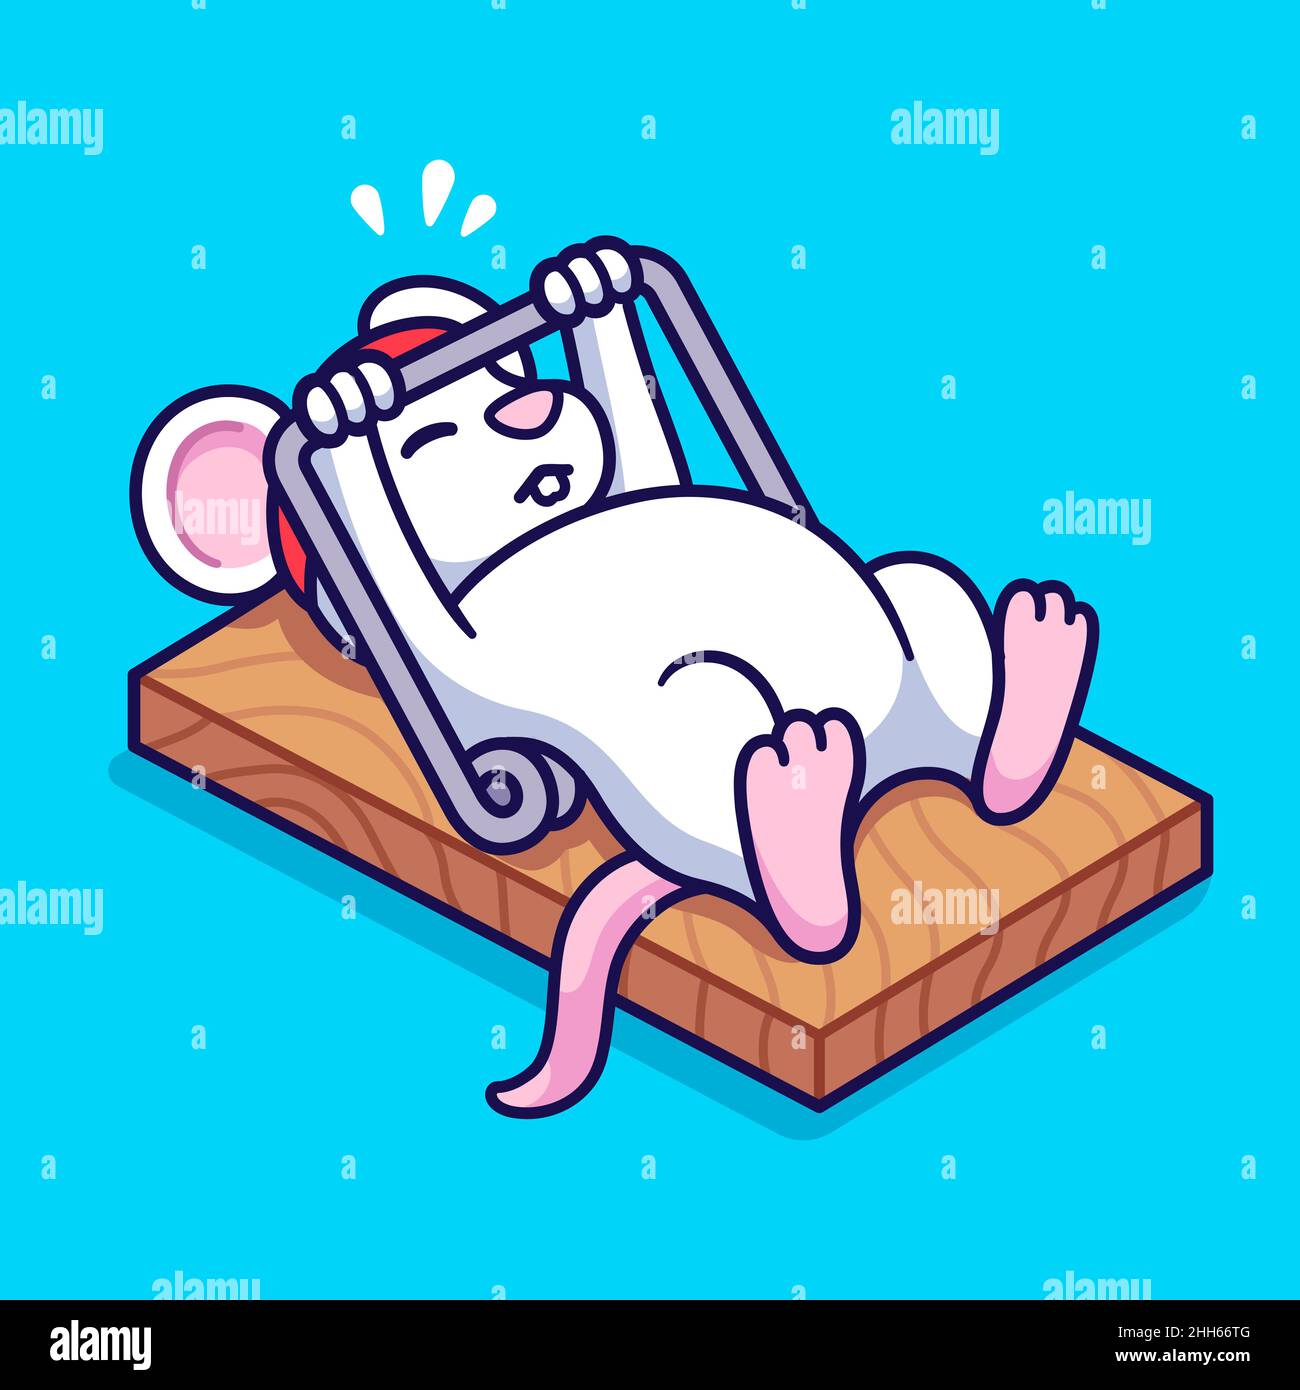 Gym rat workout, cute cartoon mouse bench pressing mousetrap. Funny